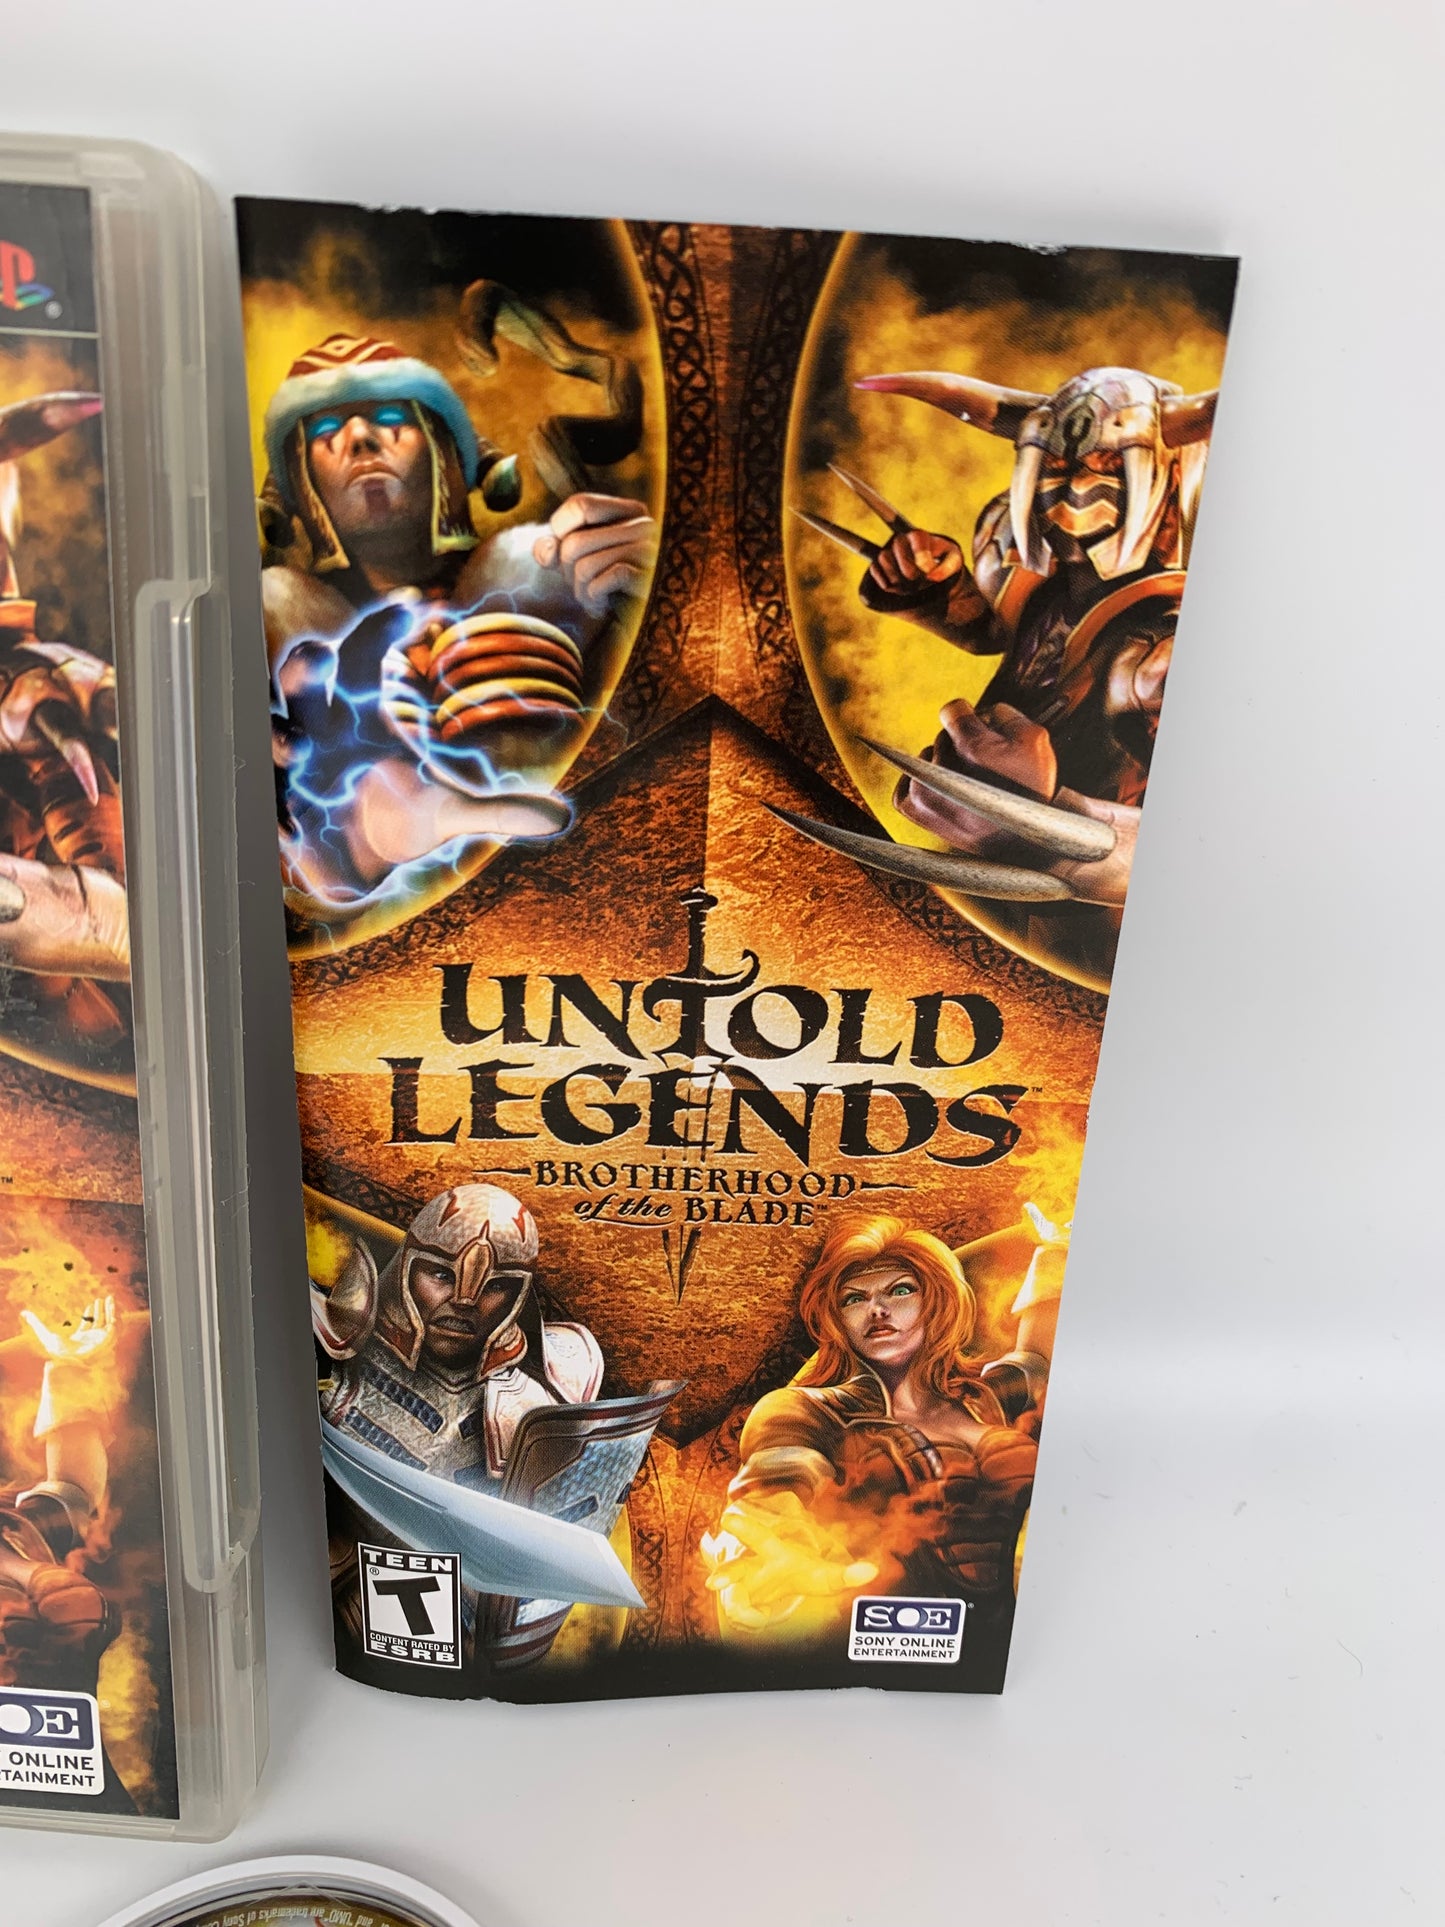 SONY PLAYSTATiON PORTABLE [PSP] | UNTOLD LEGENDS BROTHERHOOD OF THE BLADE